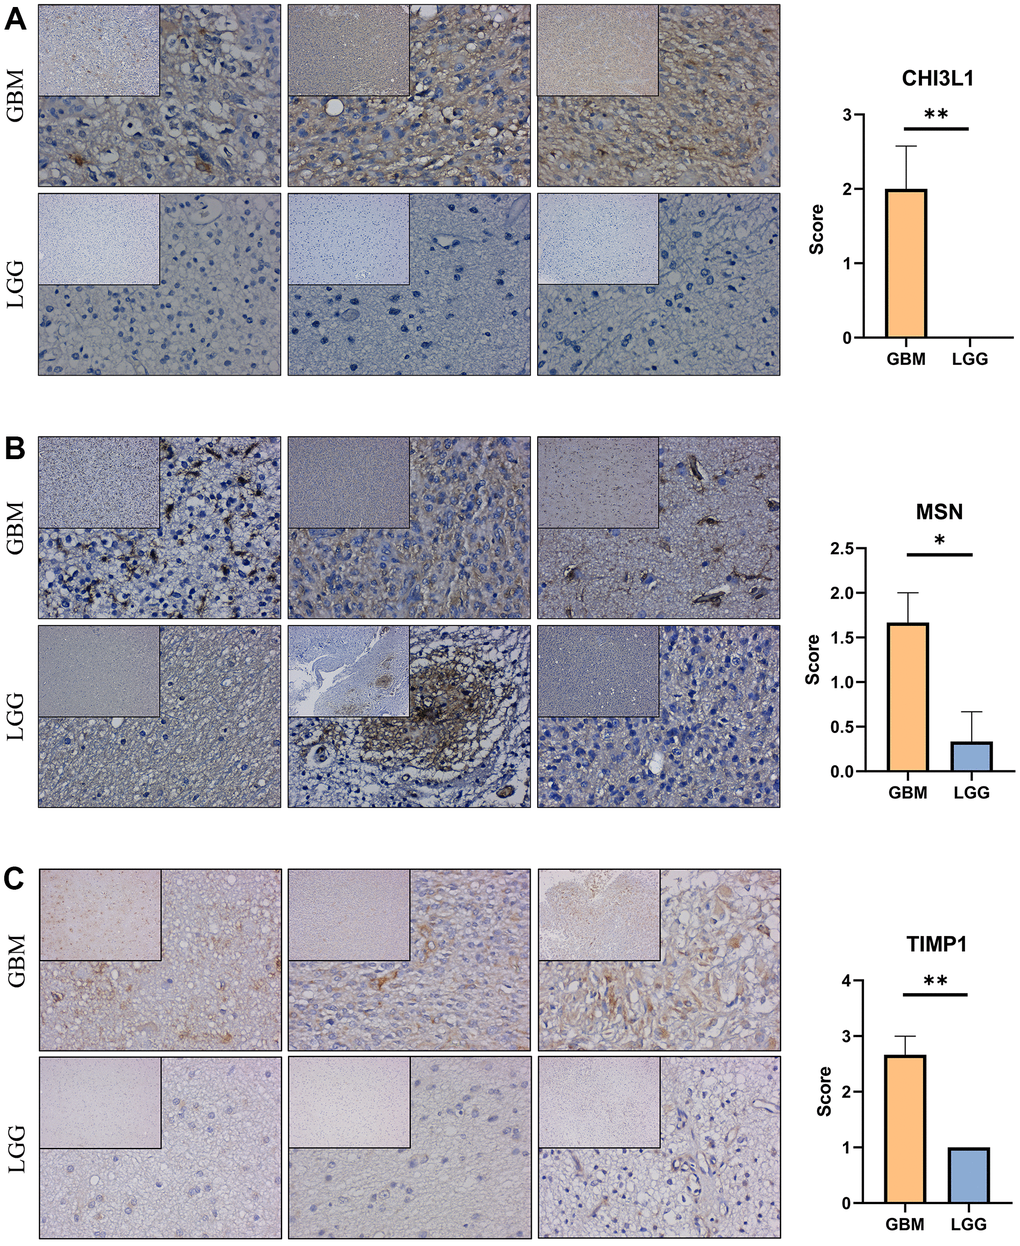 Expression verification of the prognostic genes. (A–C) Immunohistochemical staining analysis of the protein levels of CHI3L1, MSN and TIMP1 between the low-grade and high-grade gliomas. *, P